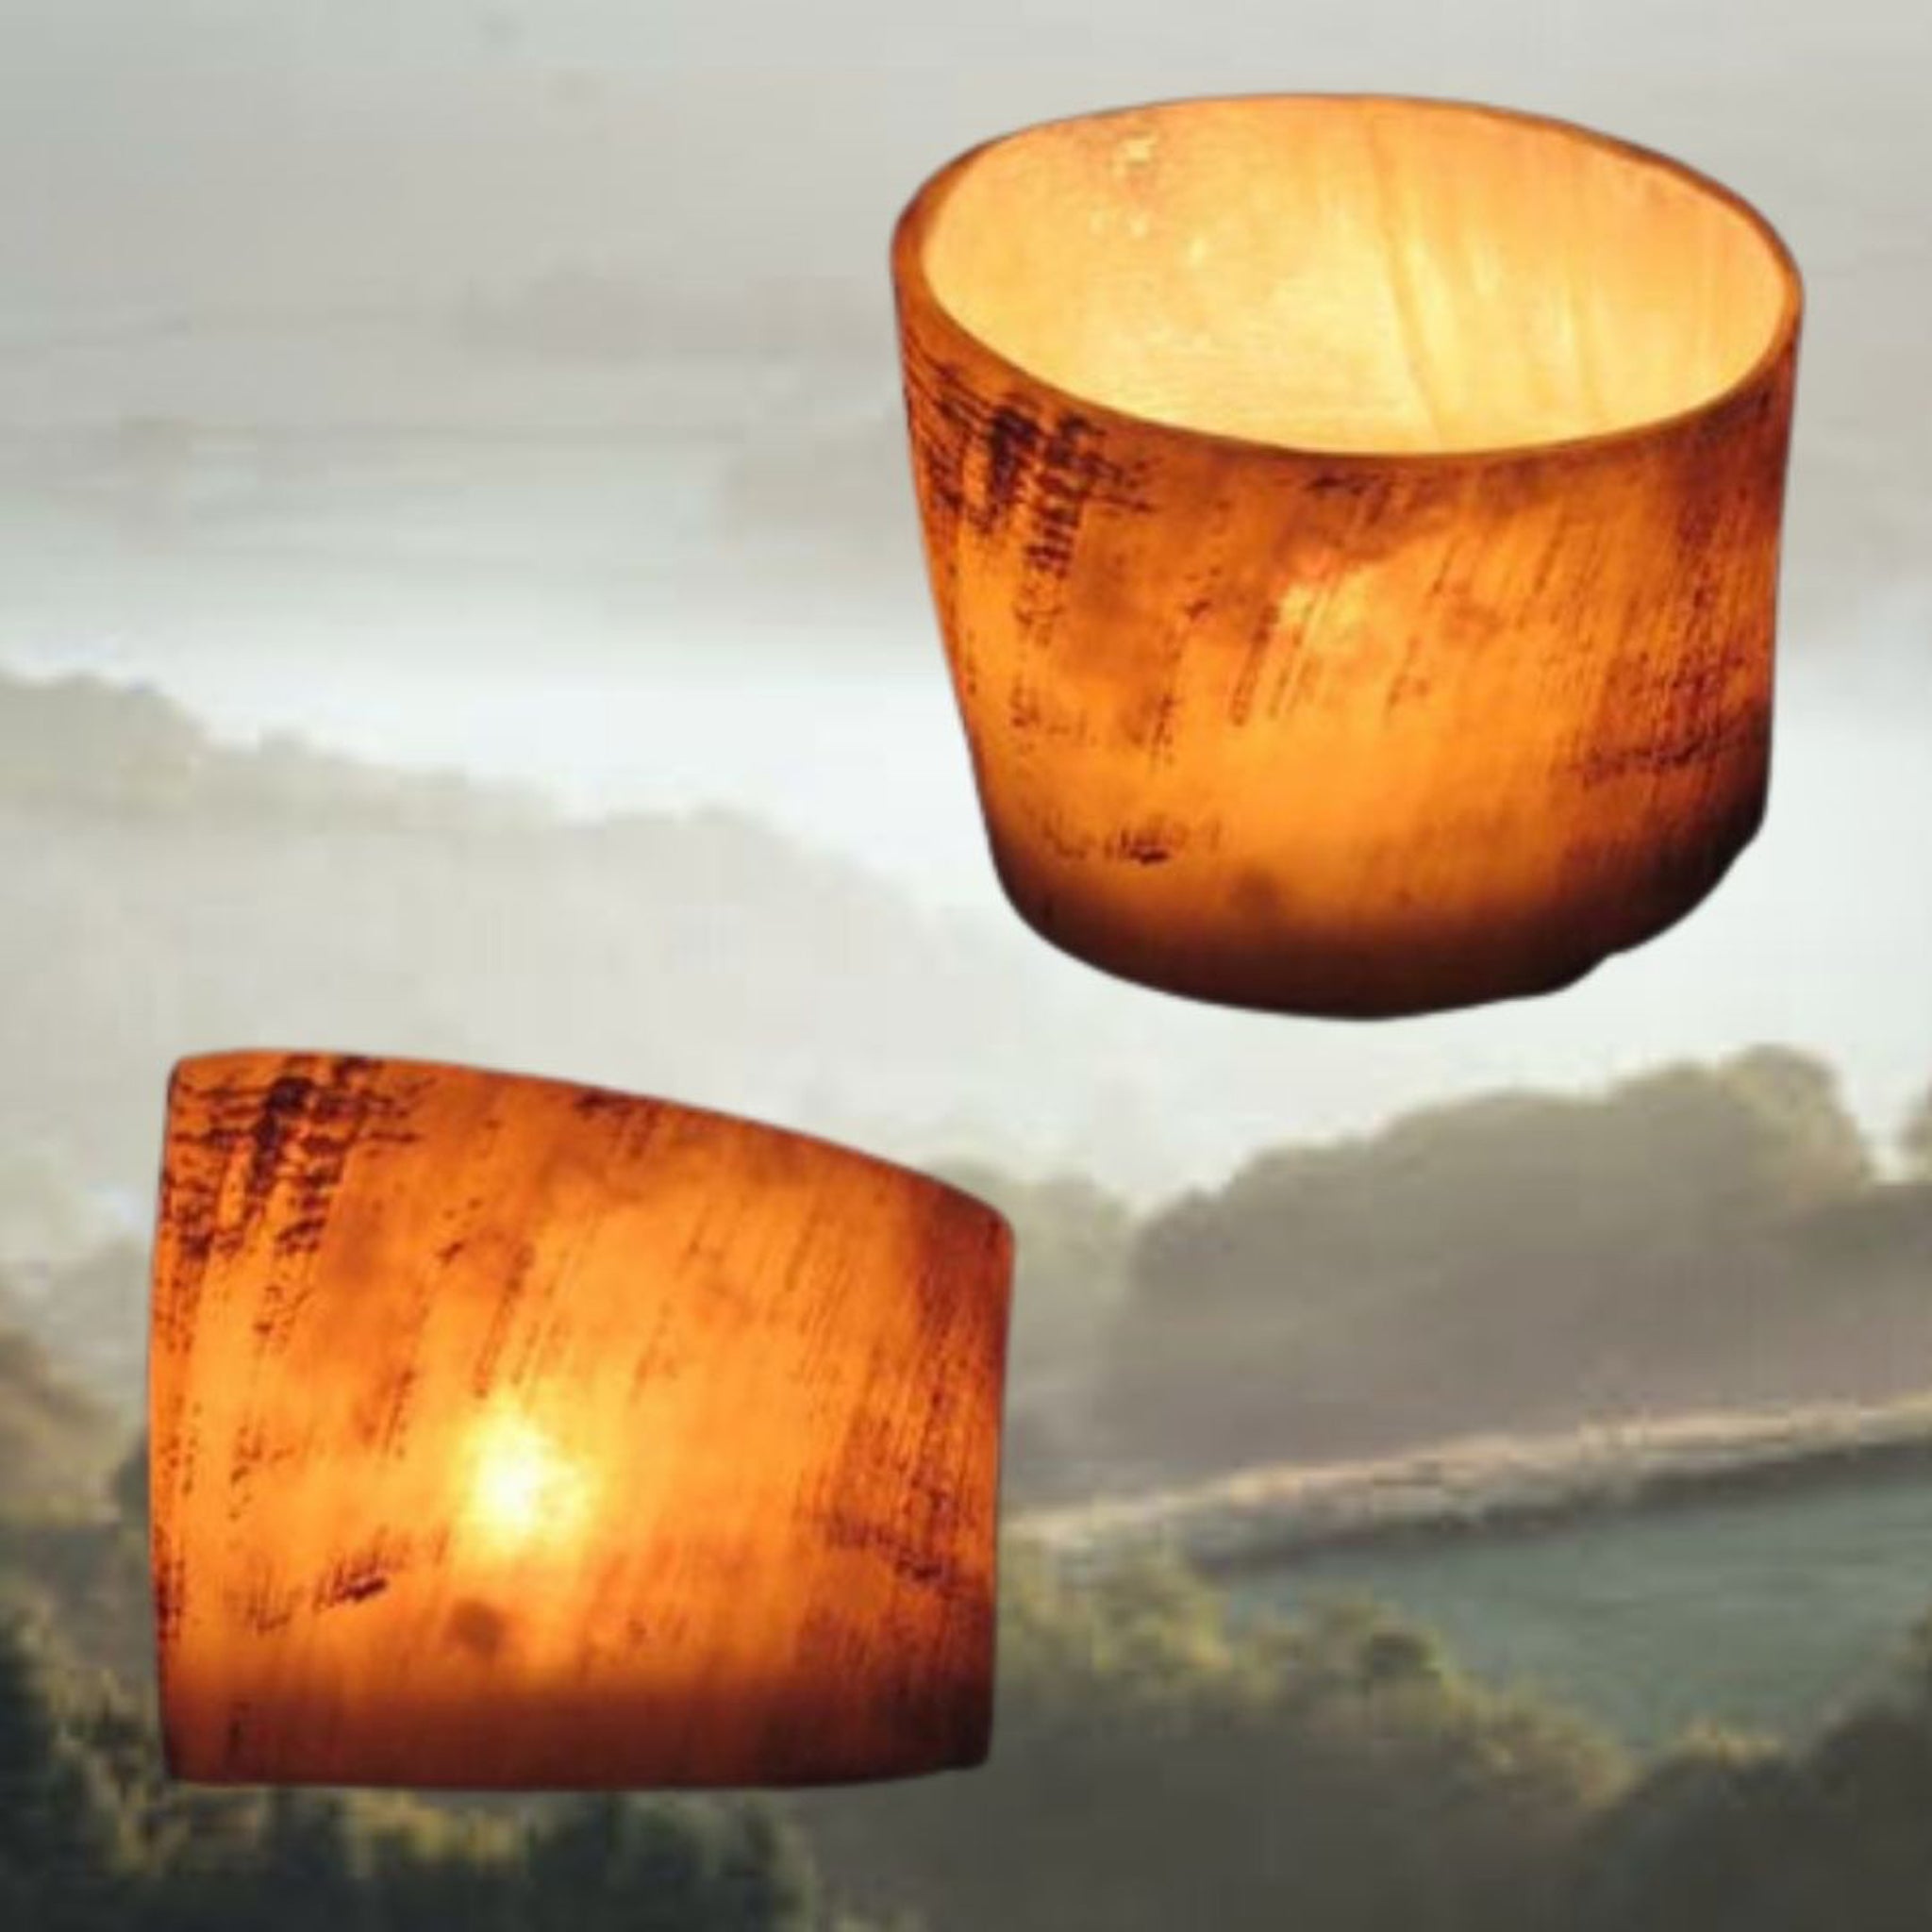 Horn Tealight Holder with Tealights - Cloudy Background